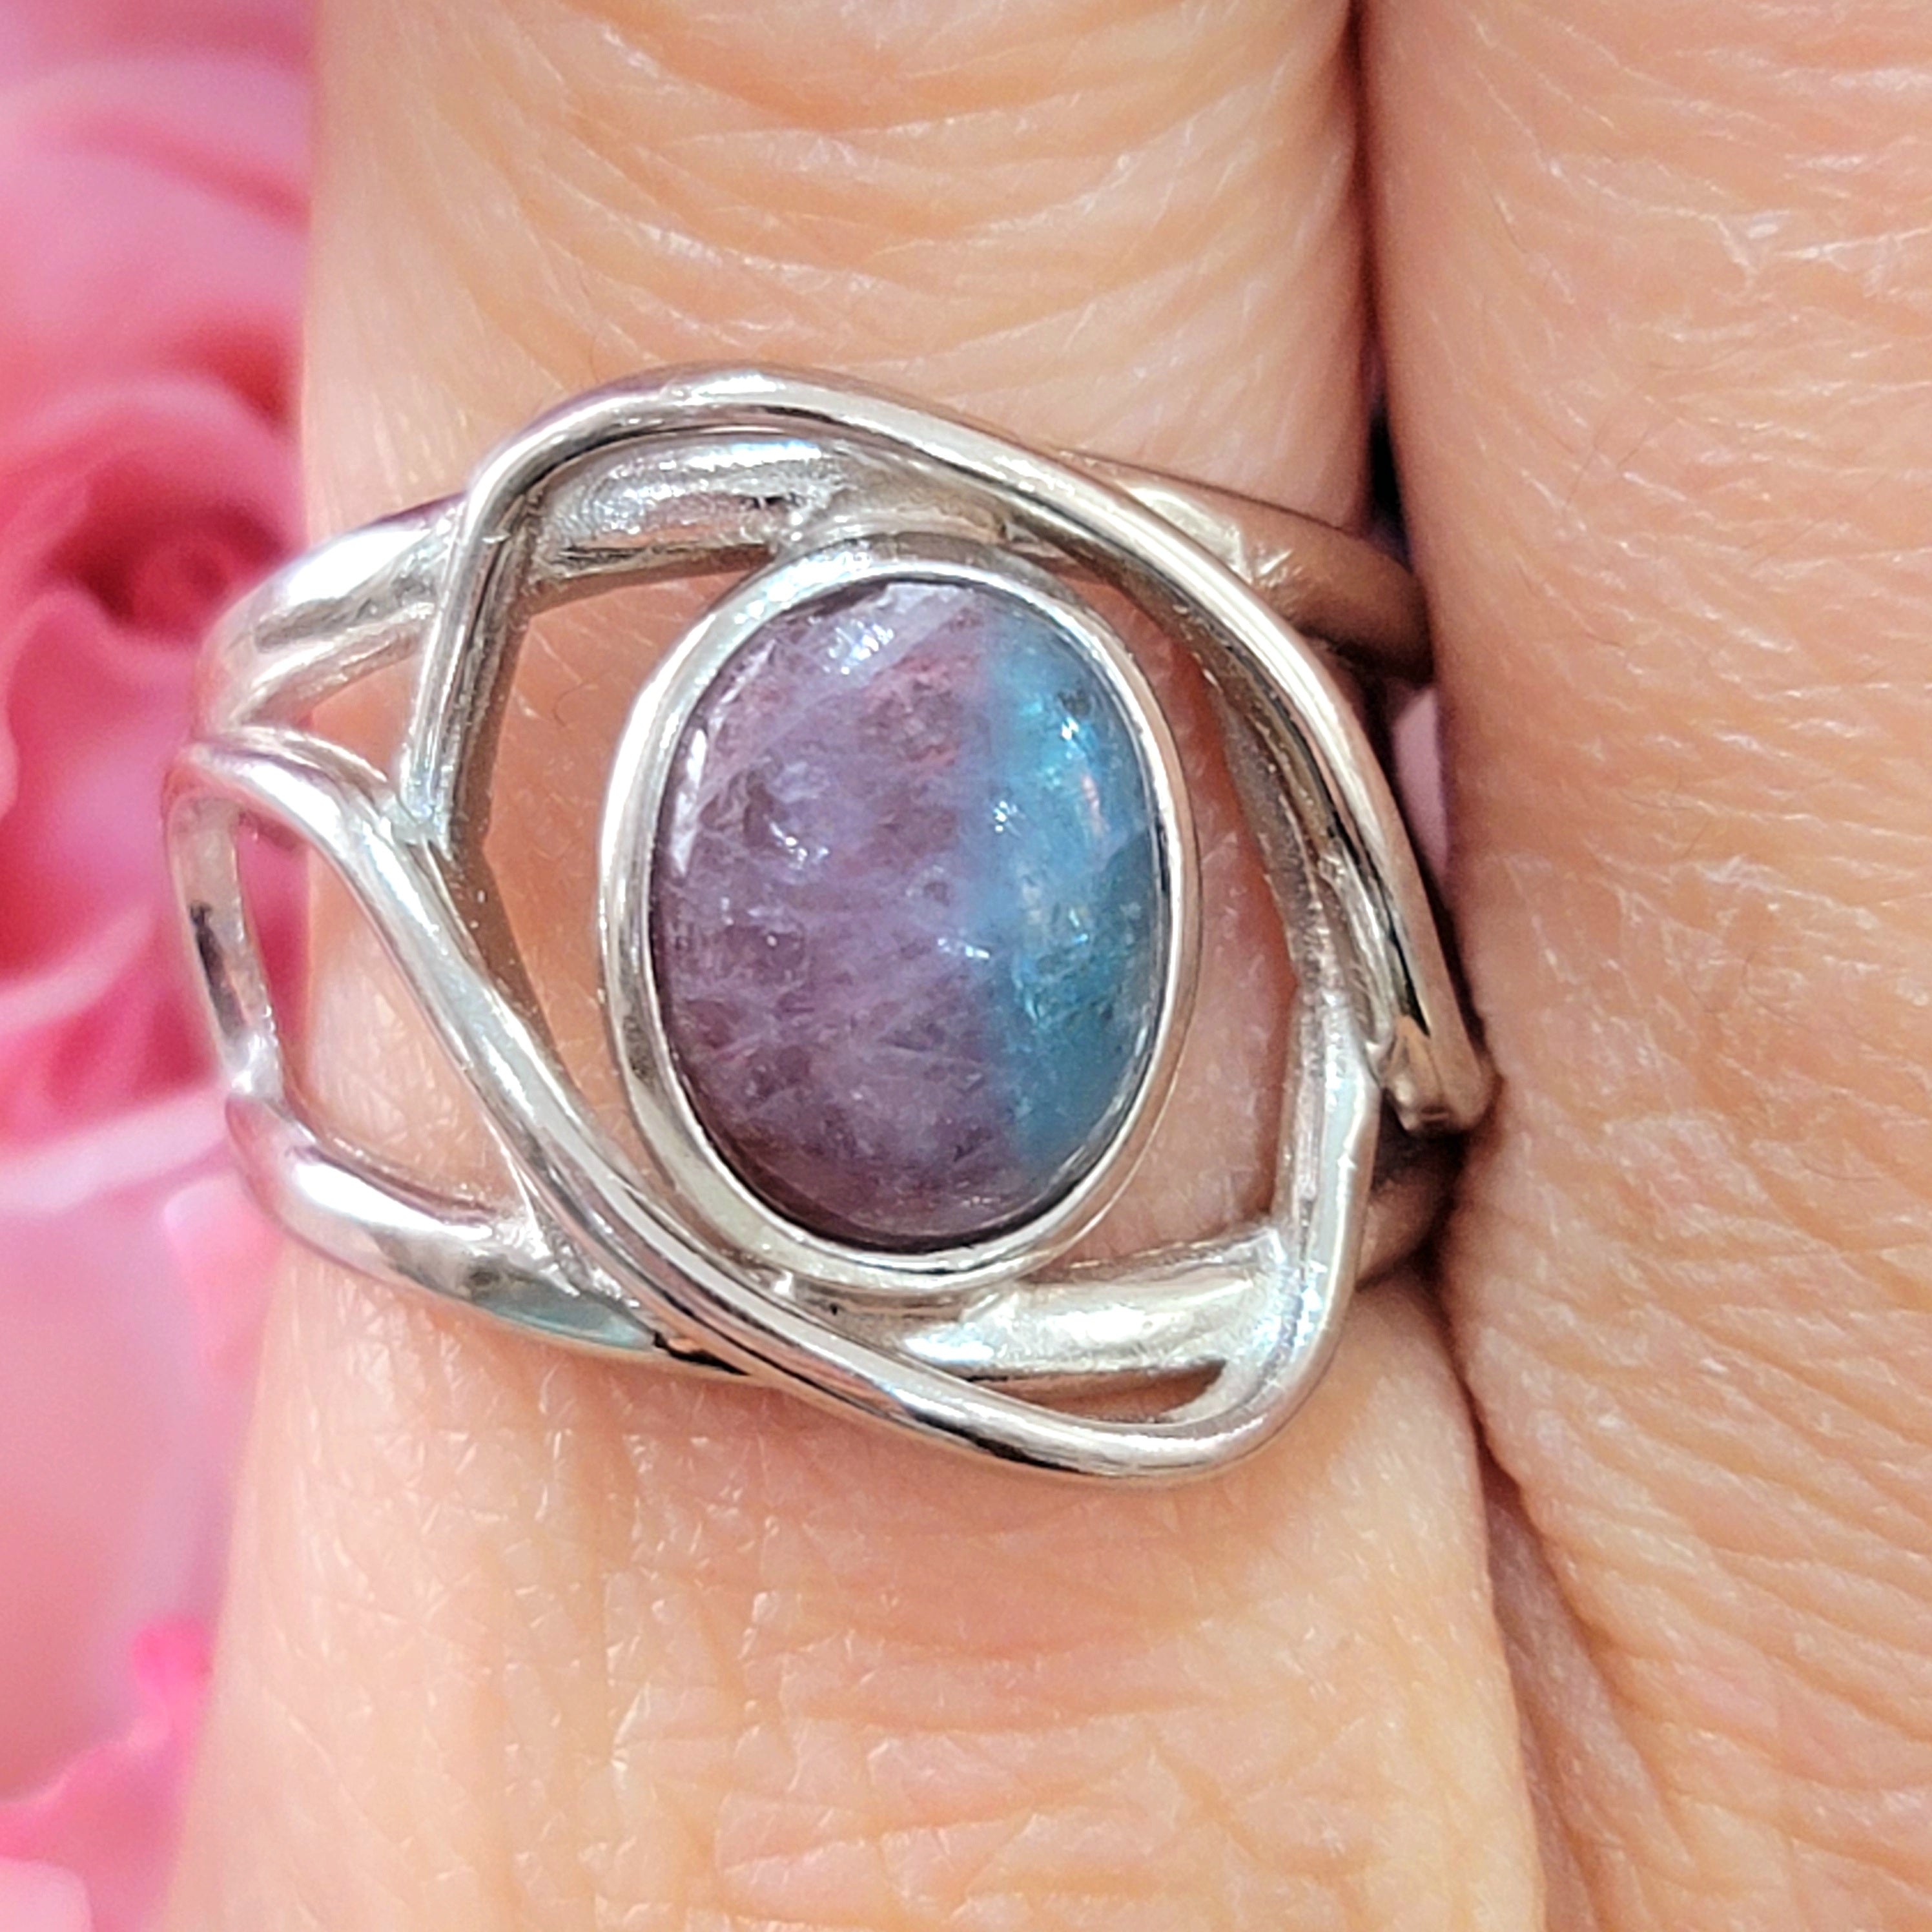 Paraiba Cotton Candy Tourmaline Adjustable Finger Ring for Healing, Joy and Love